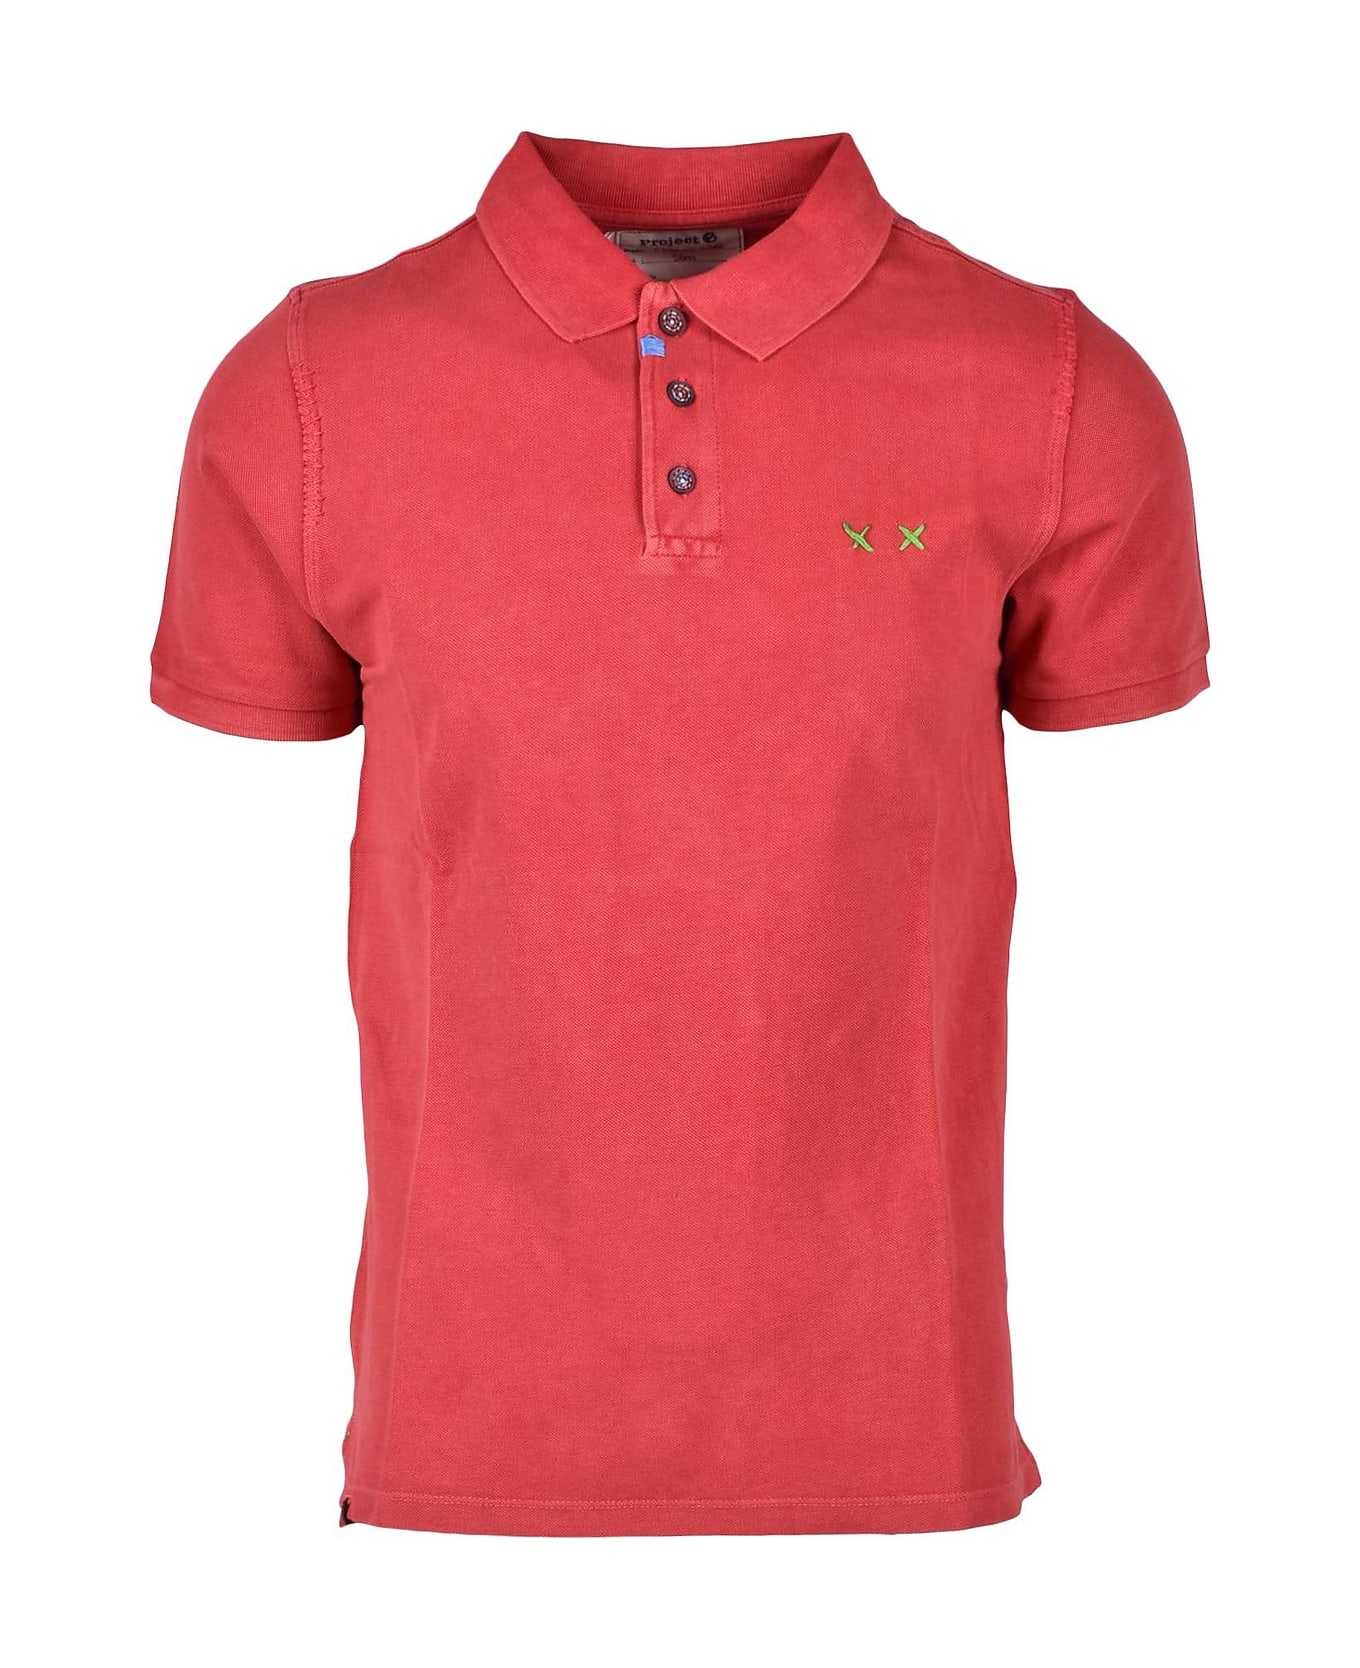 Project e Men's Red Shirt - Red